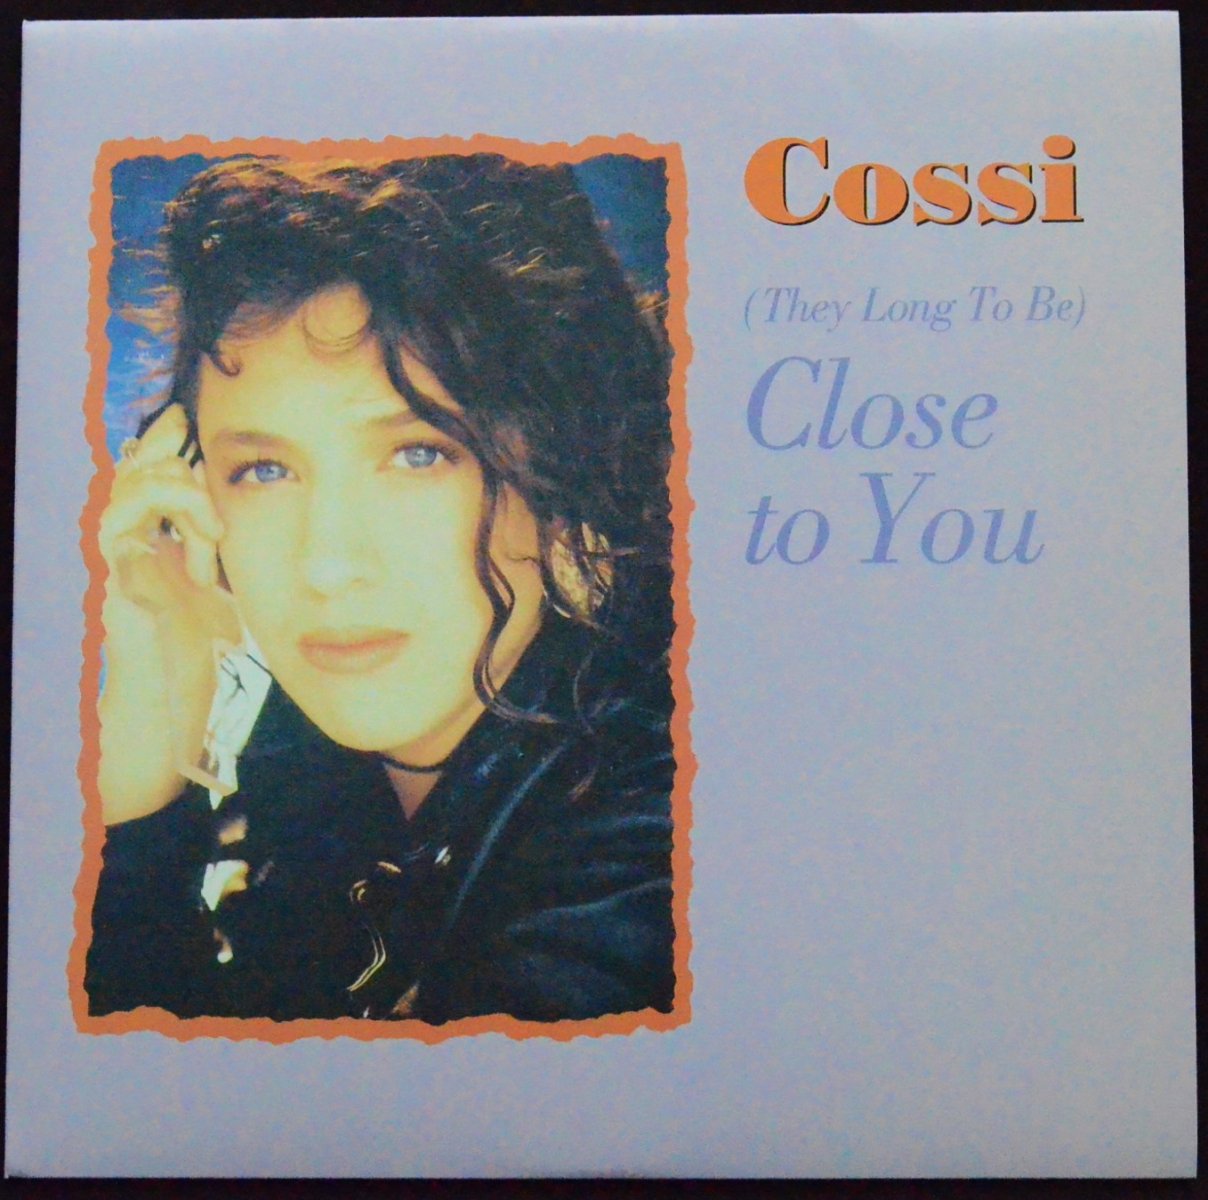 COSSI ‎/ (THEY LONG TO BE) CLOSE TO YOU (12